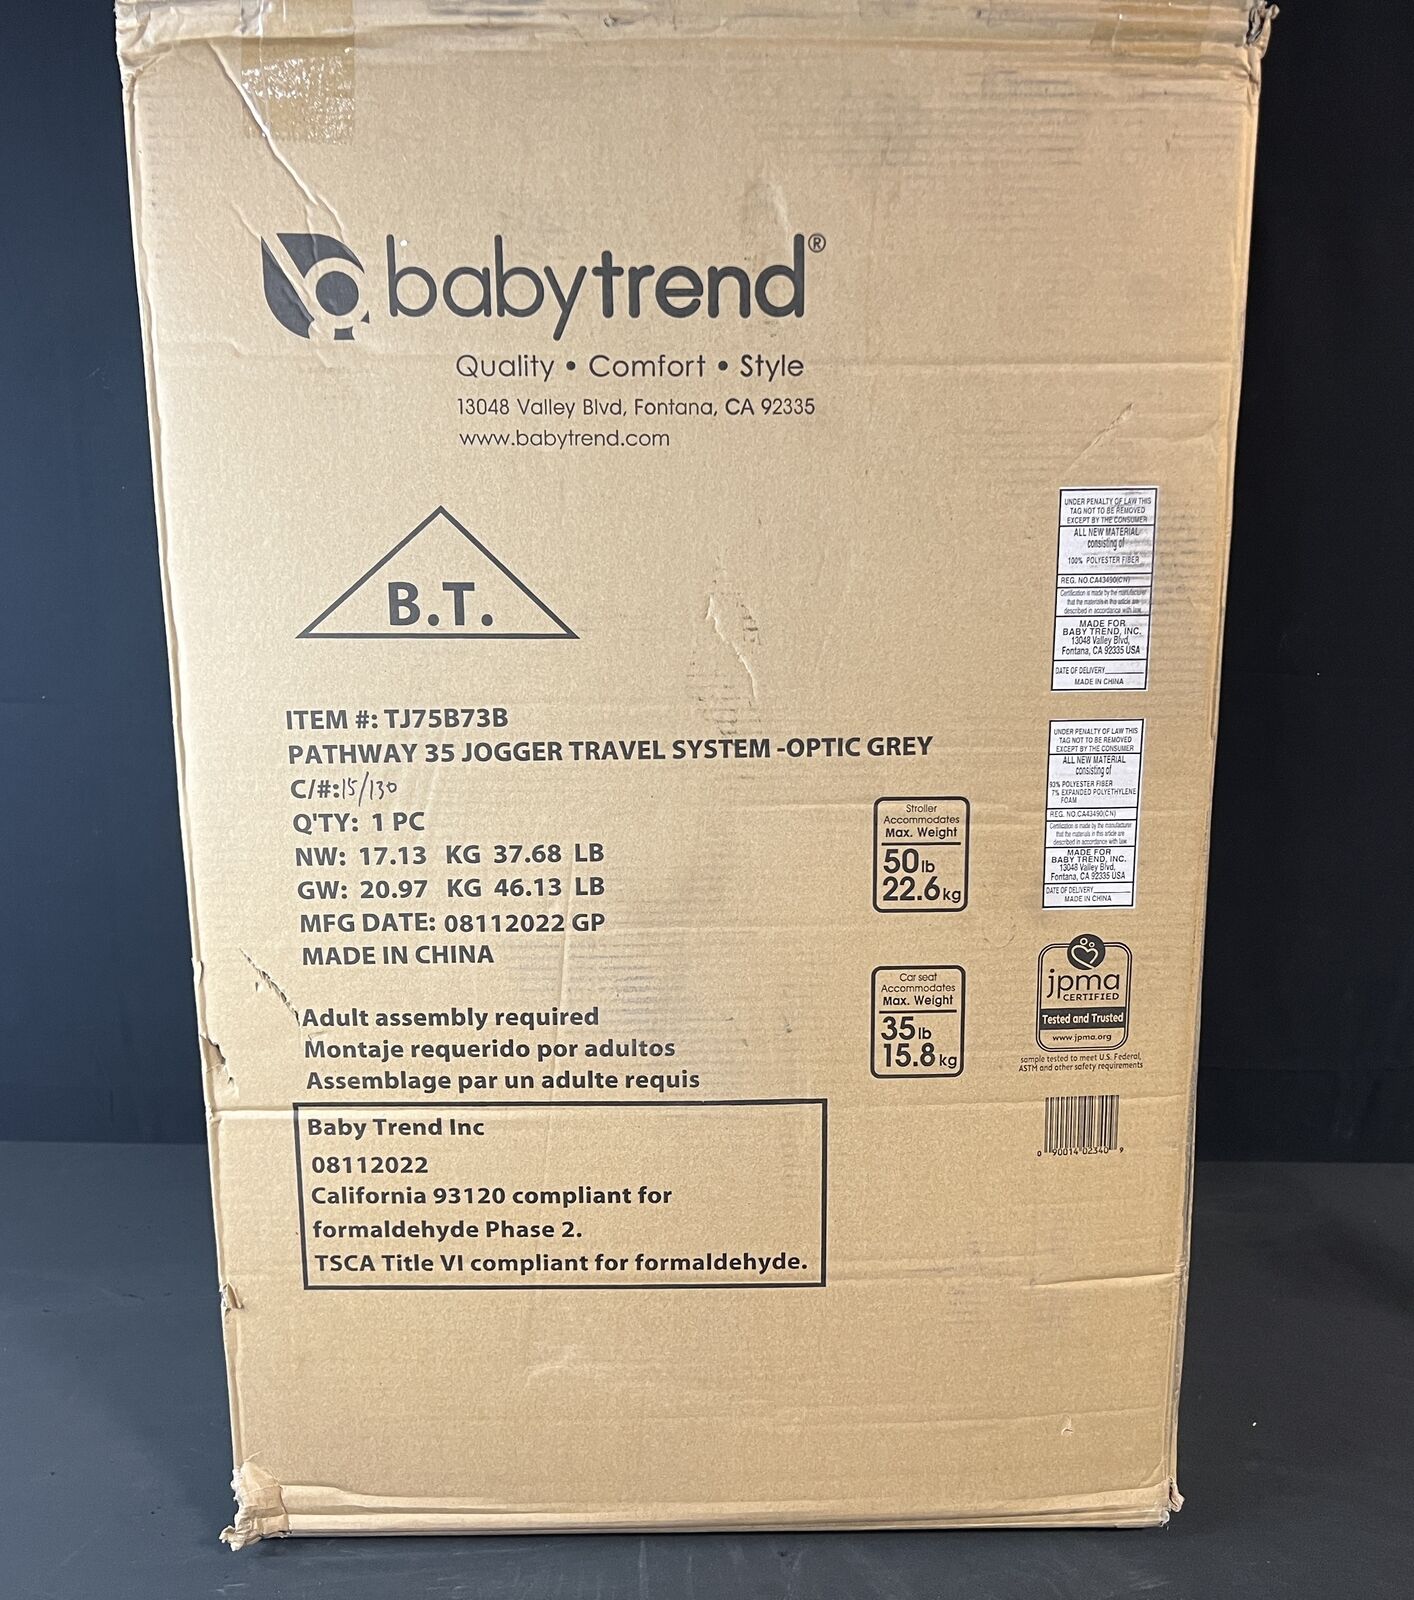 New BabyTrend Pathway 35 Jogger Travel System (Optic Grey)